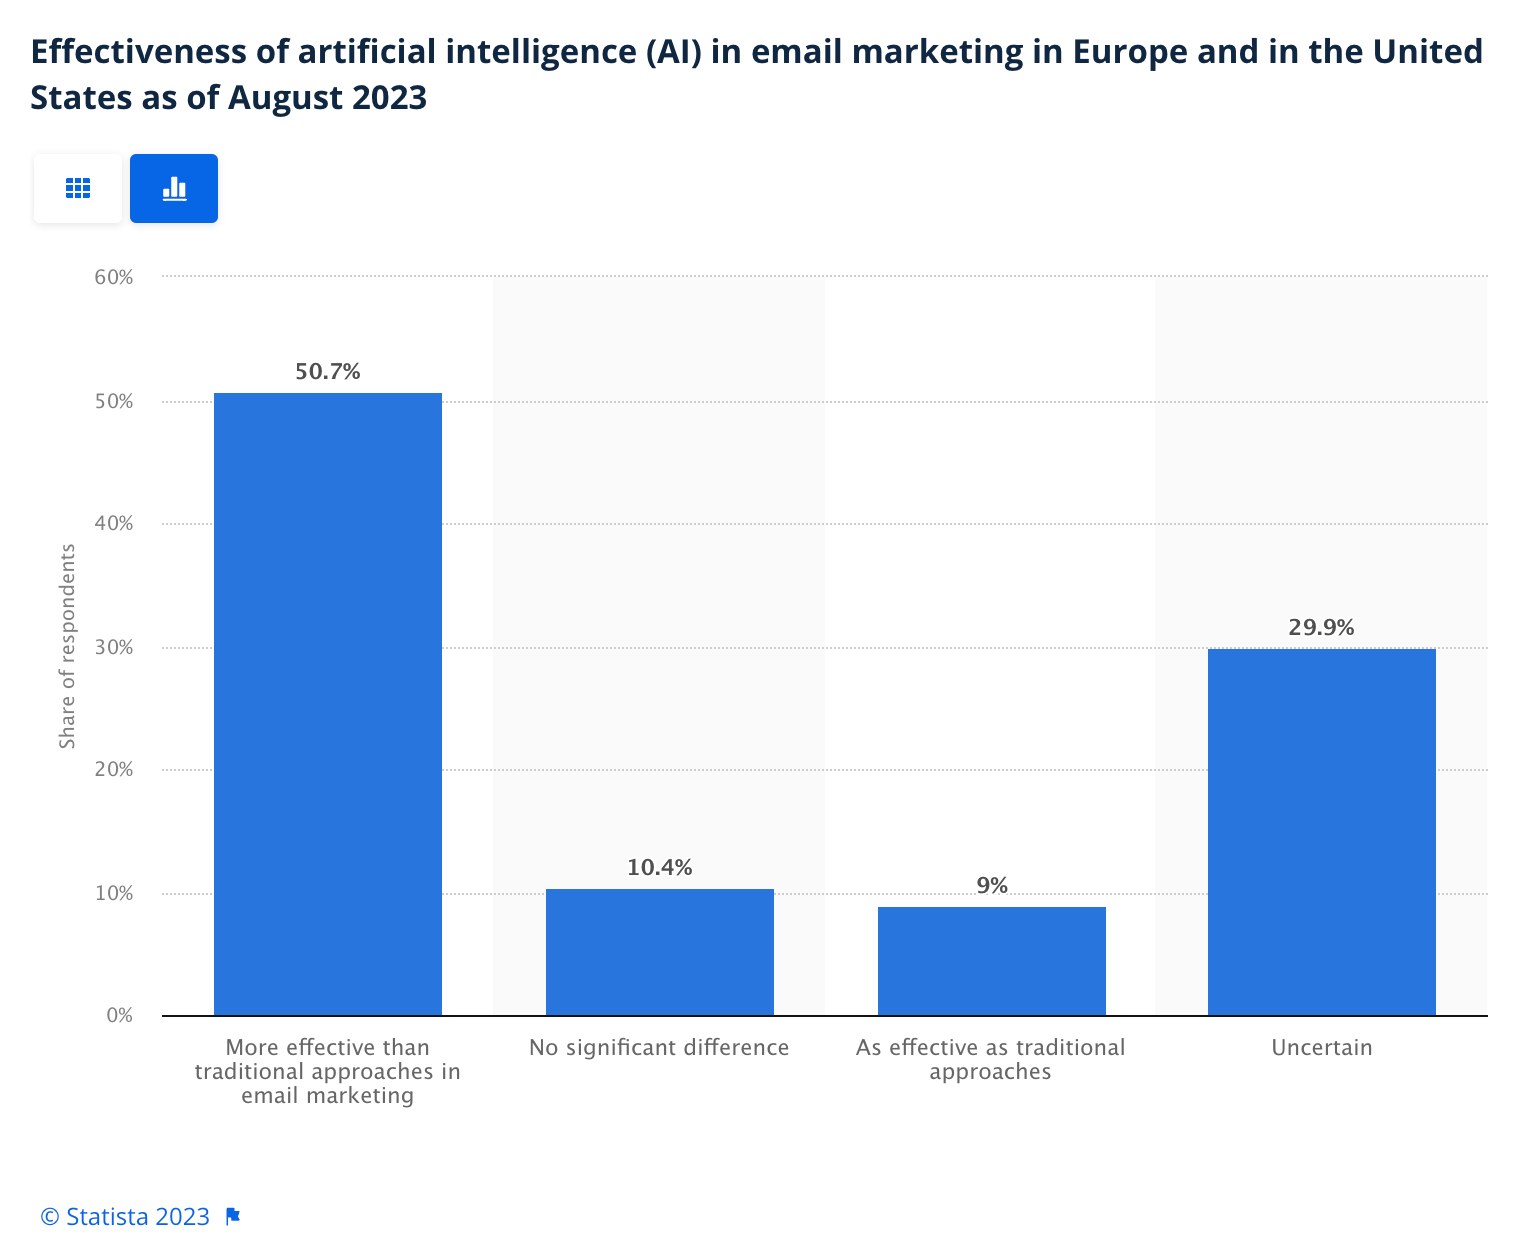 AI and email marketing